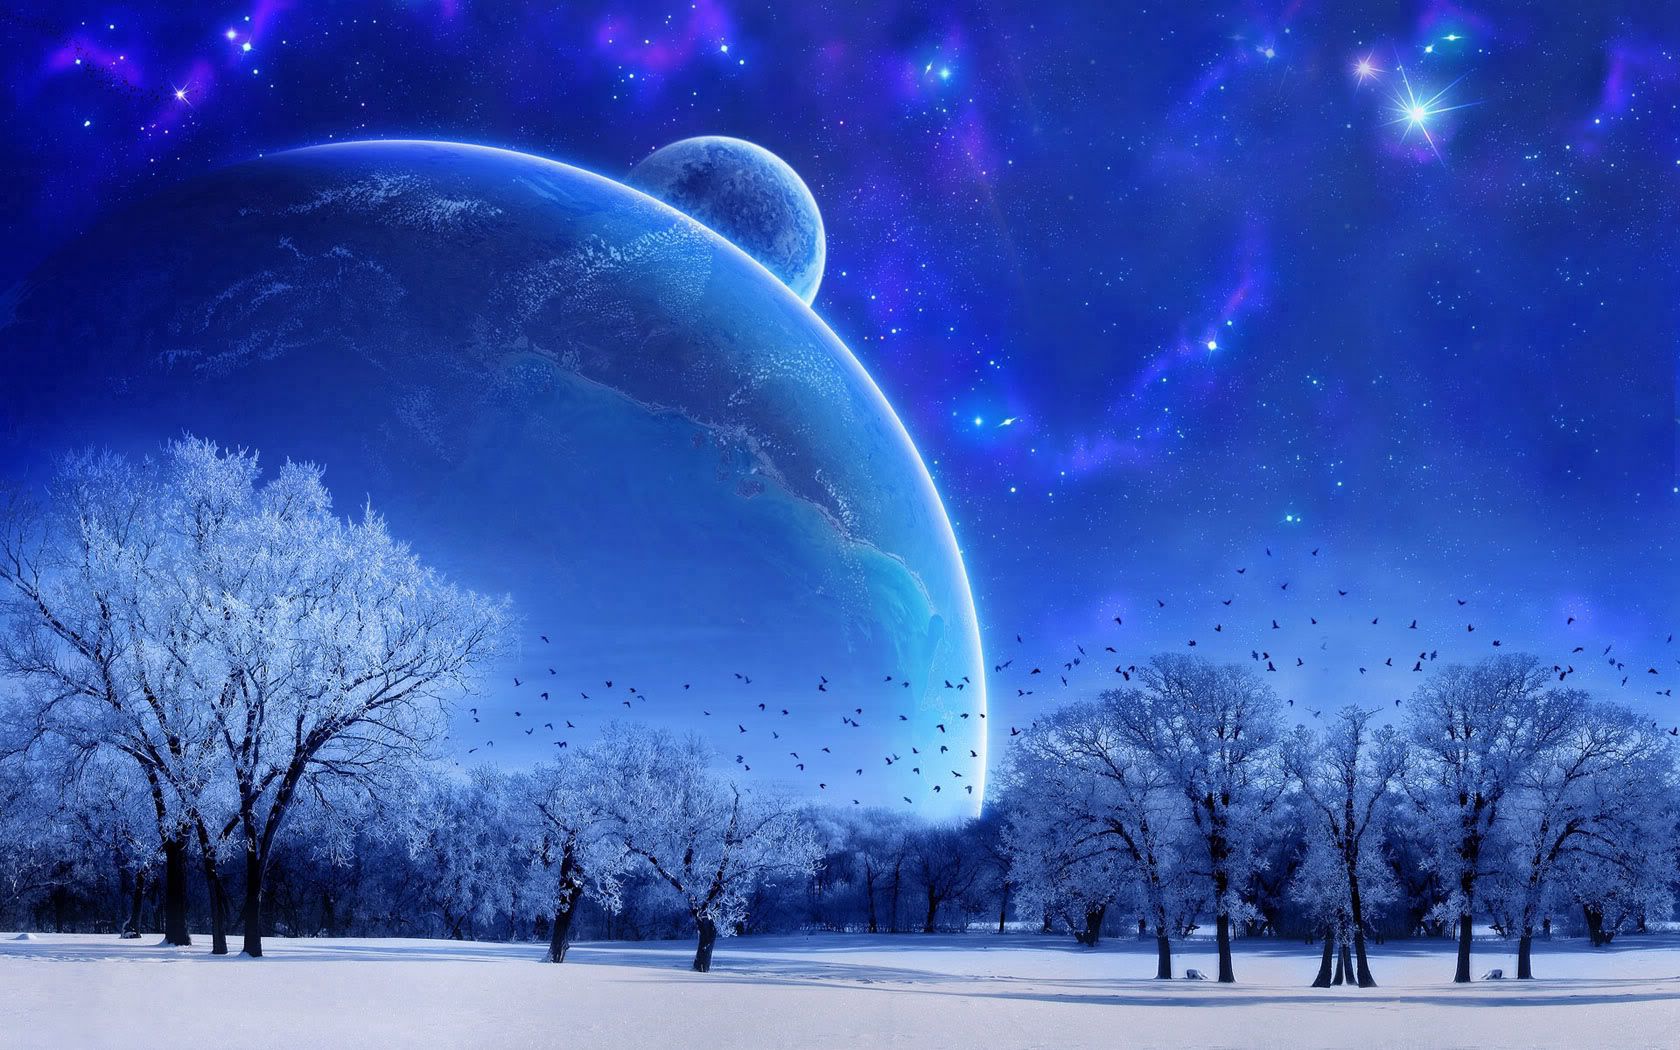 wallpapers sky, landscape, abstract, nature, full moon, snow, winter, birds, trees, evening